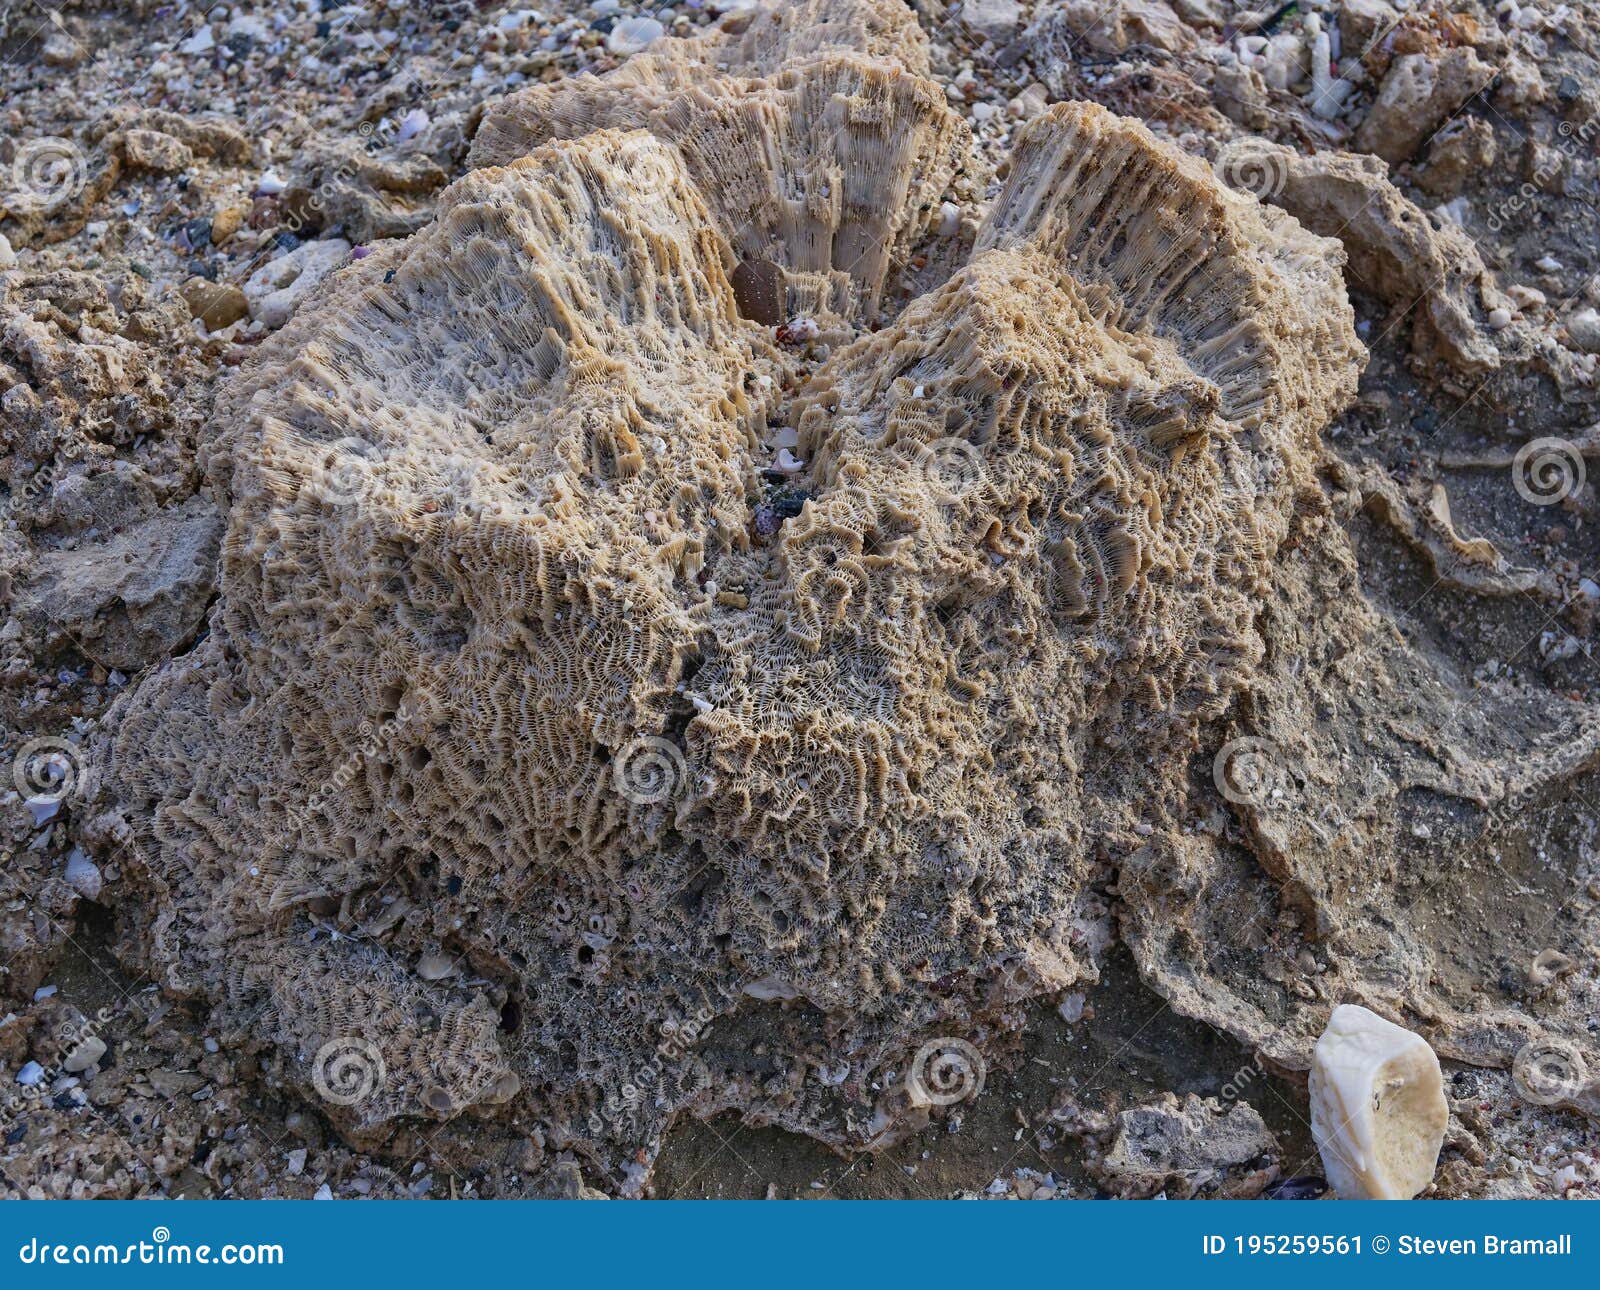 Skeleton of a Large Brain Coral on a Beach on the Shore of the Red Sea ...